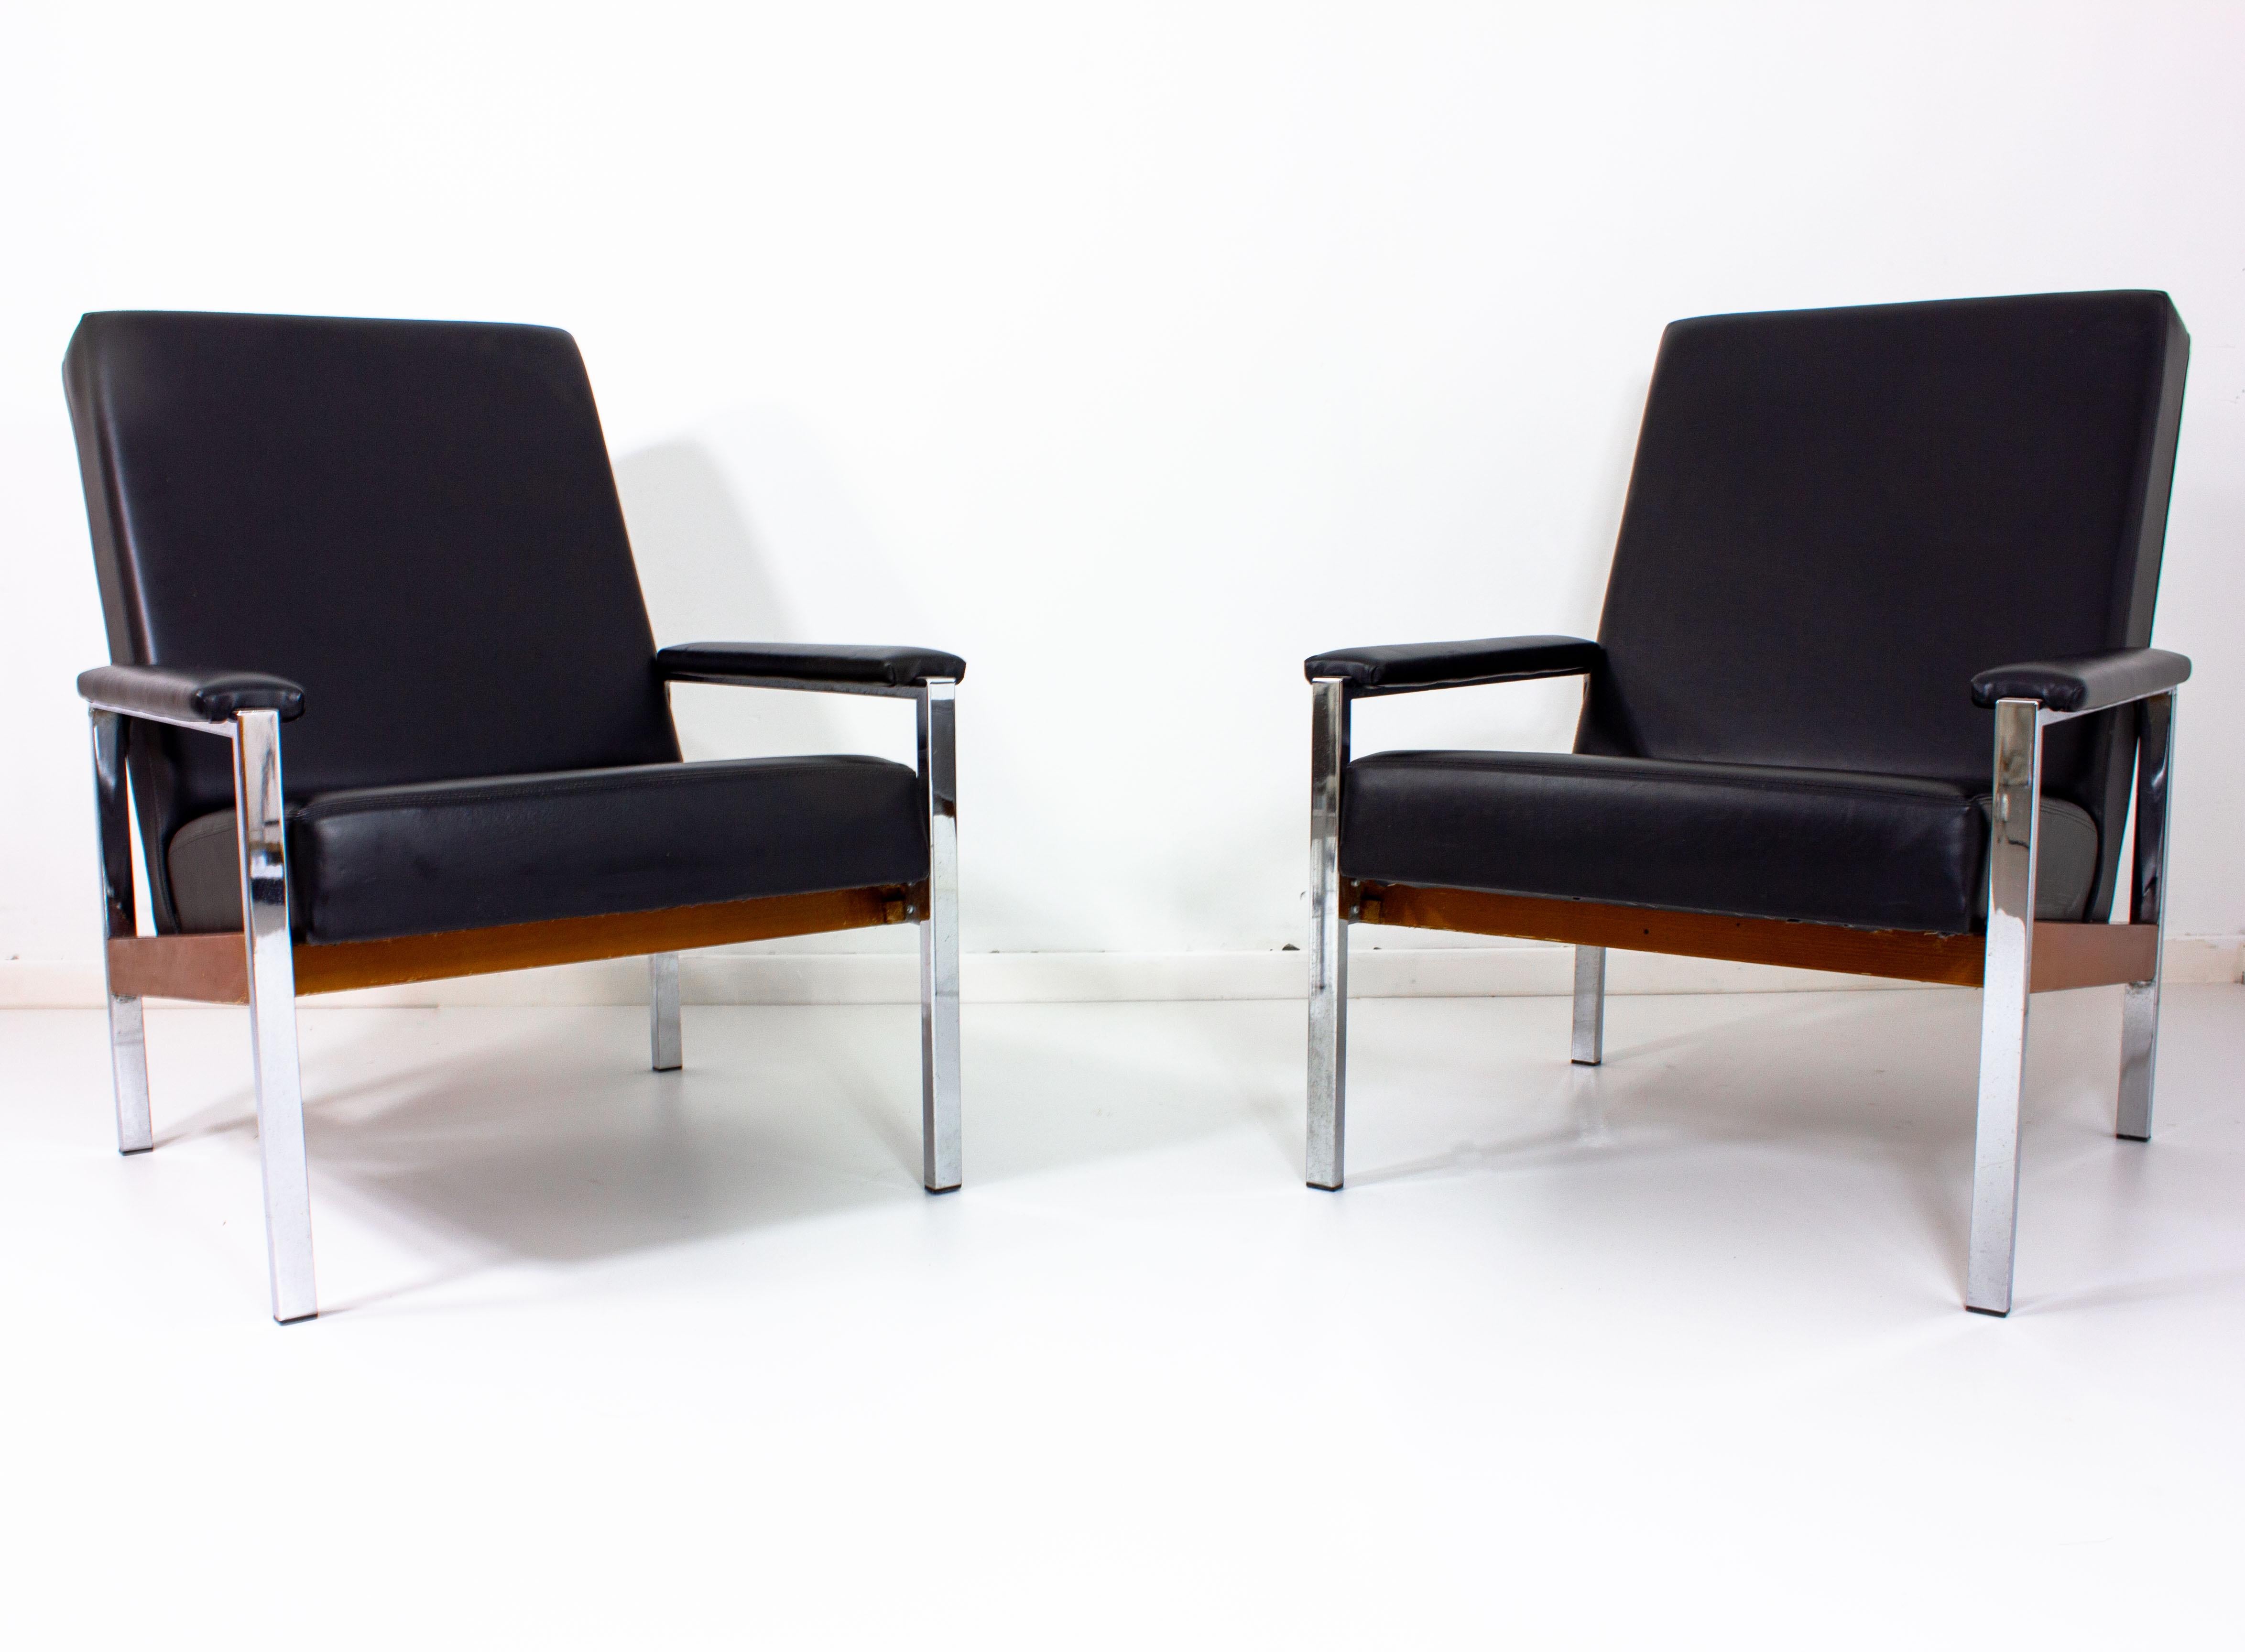 Elegant in form and minimalist in execution, these two black leather chairs look like they came straight out of Mad Men.